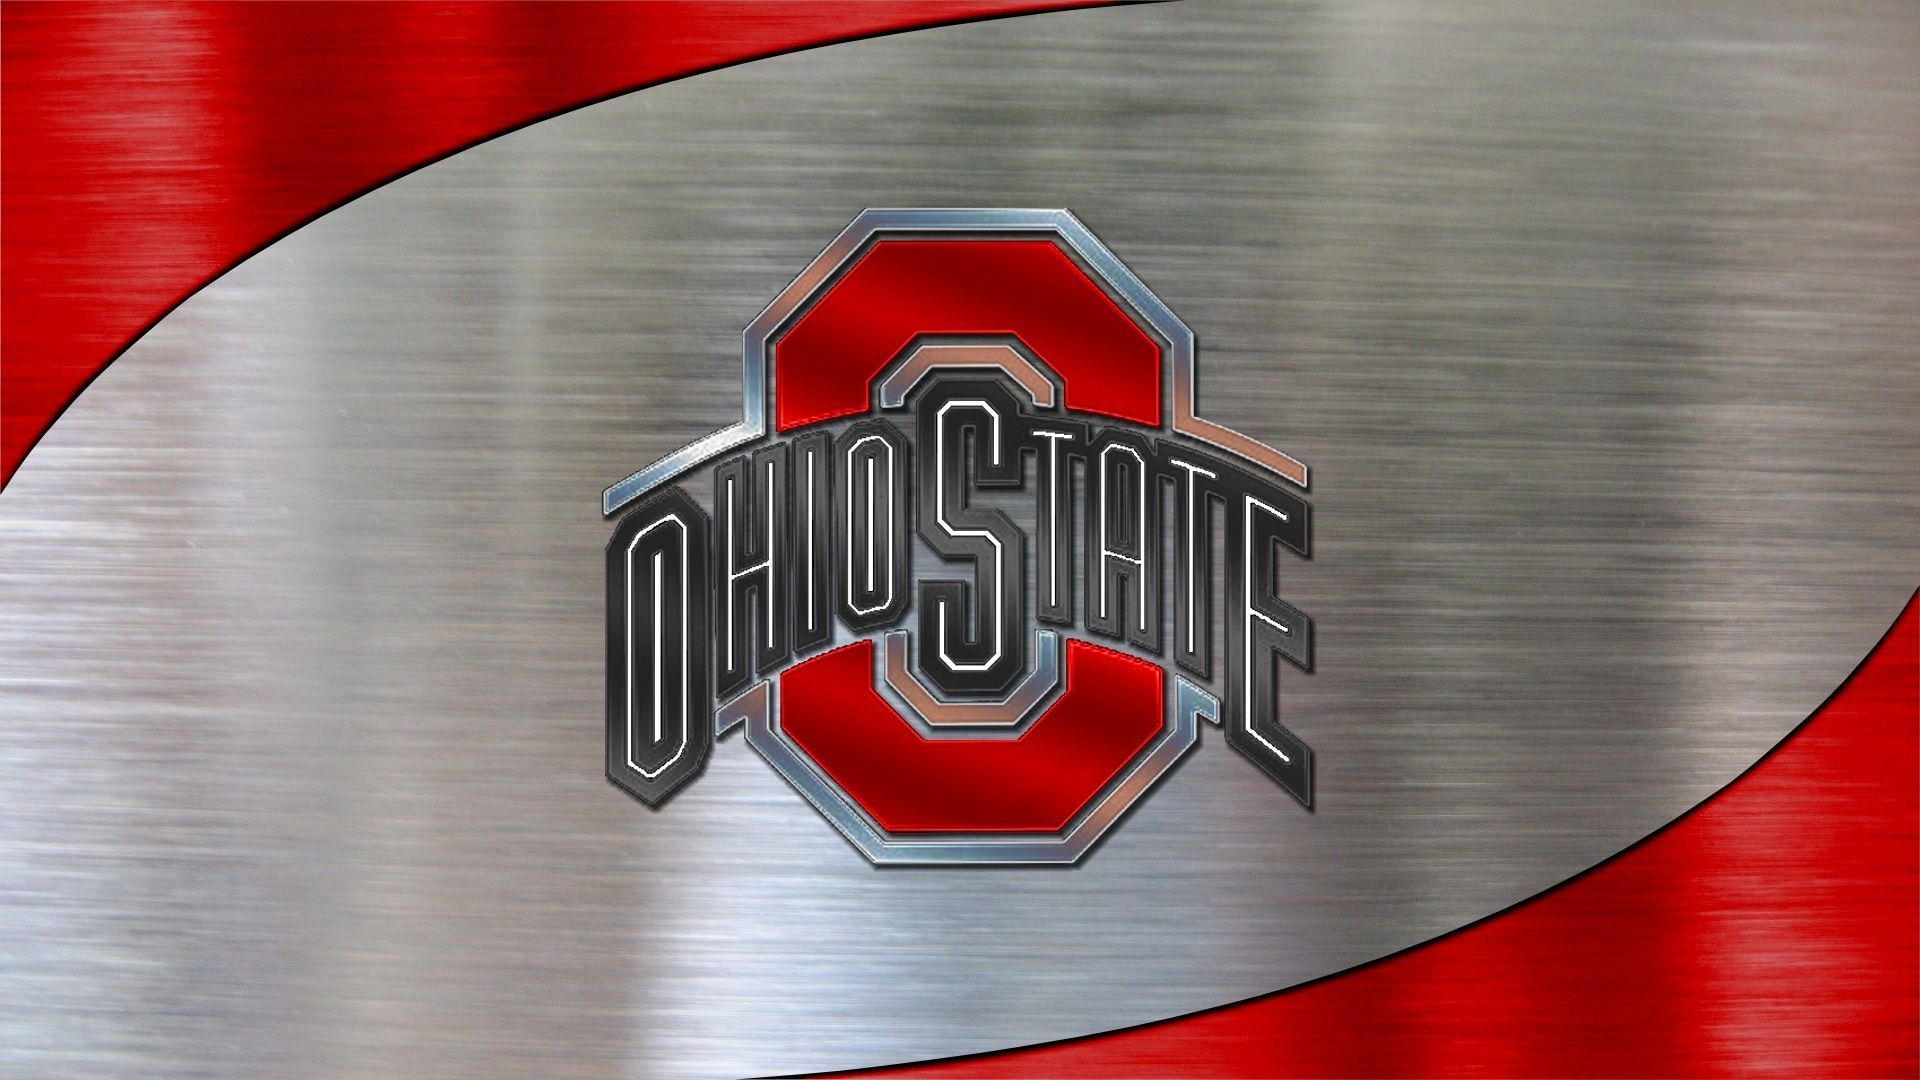 Best Ohio State Wallpaper Free FULL HD 1080p For PC Background 2019. Ohio state wallpaper, Ohio state football, Ohio state buckeyes football